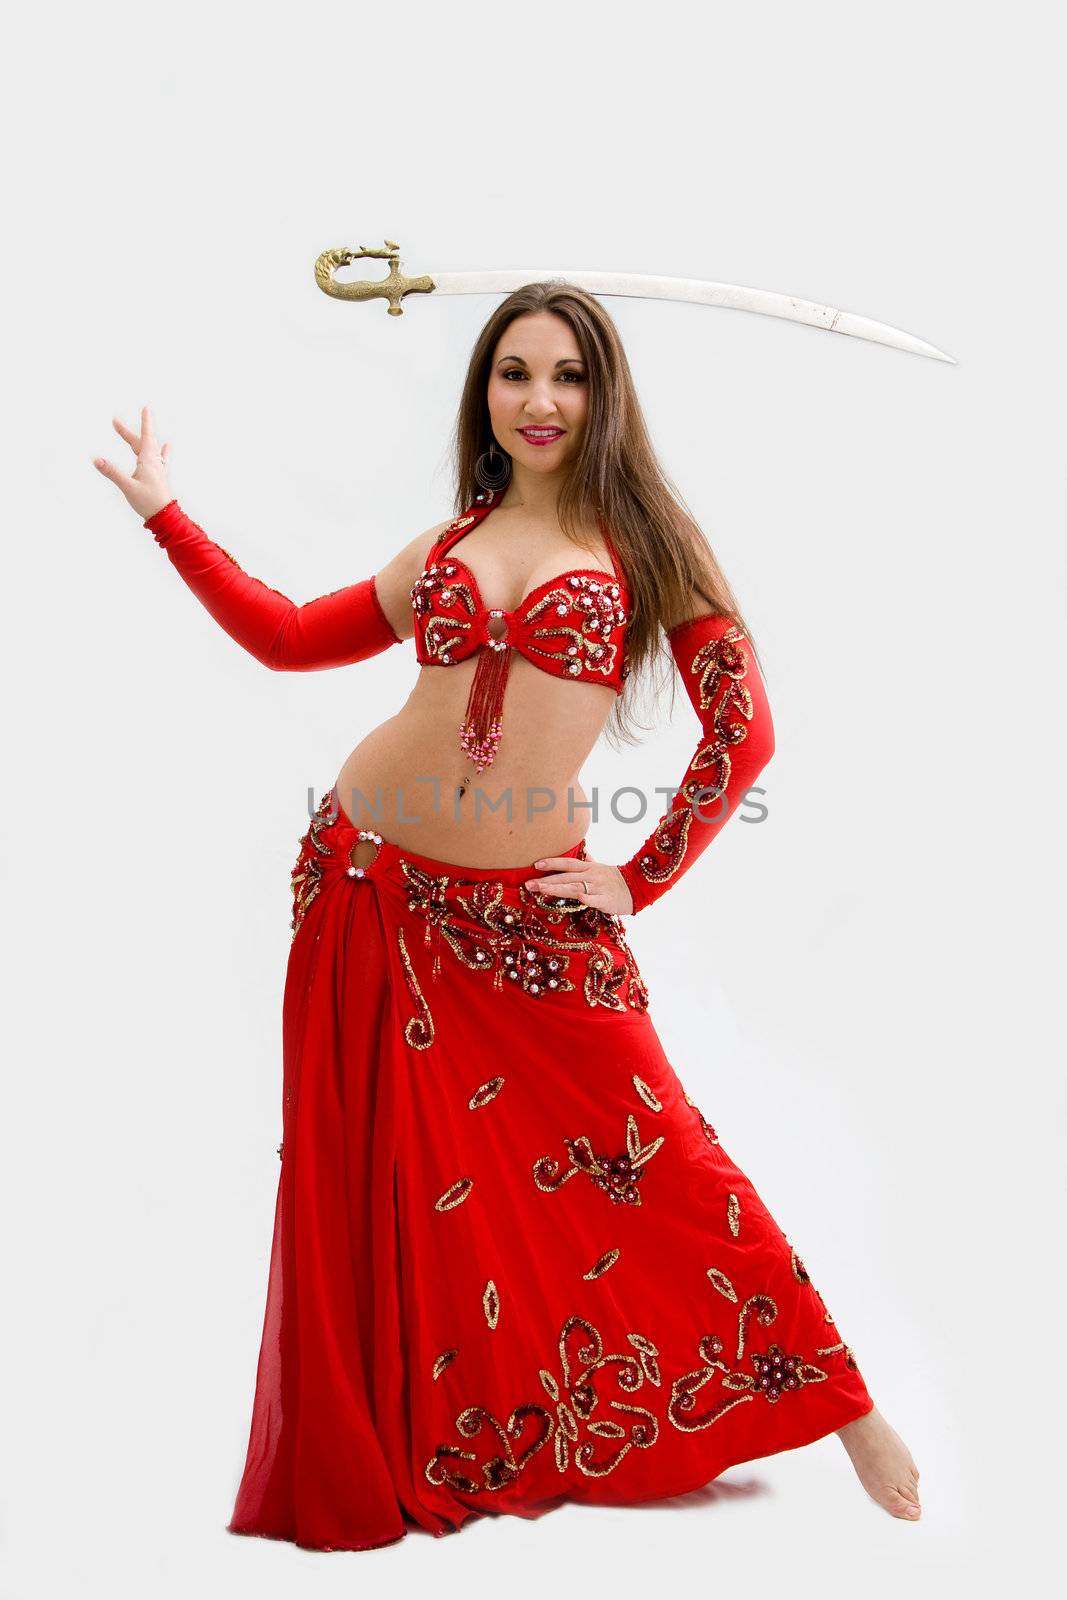 Beautiful belly dancer in red outfit with sword on her head, isolated